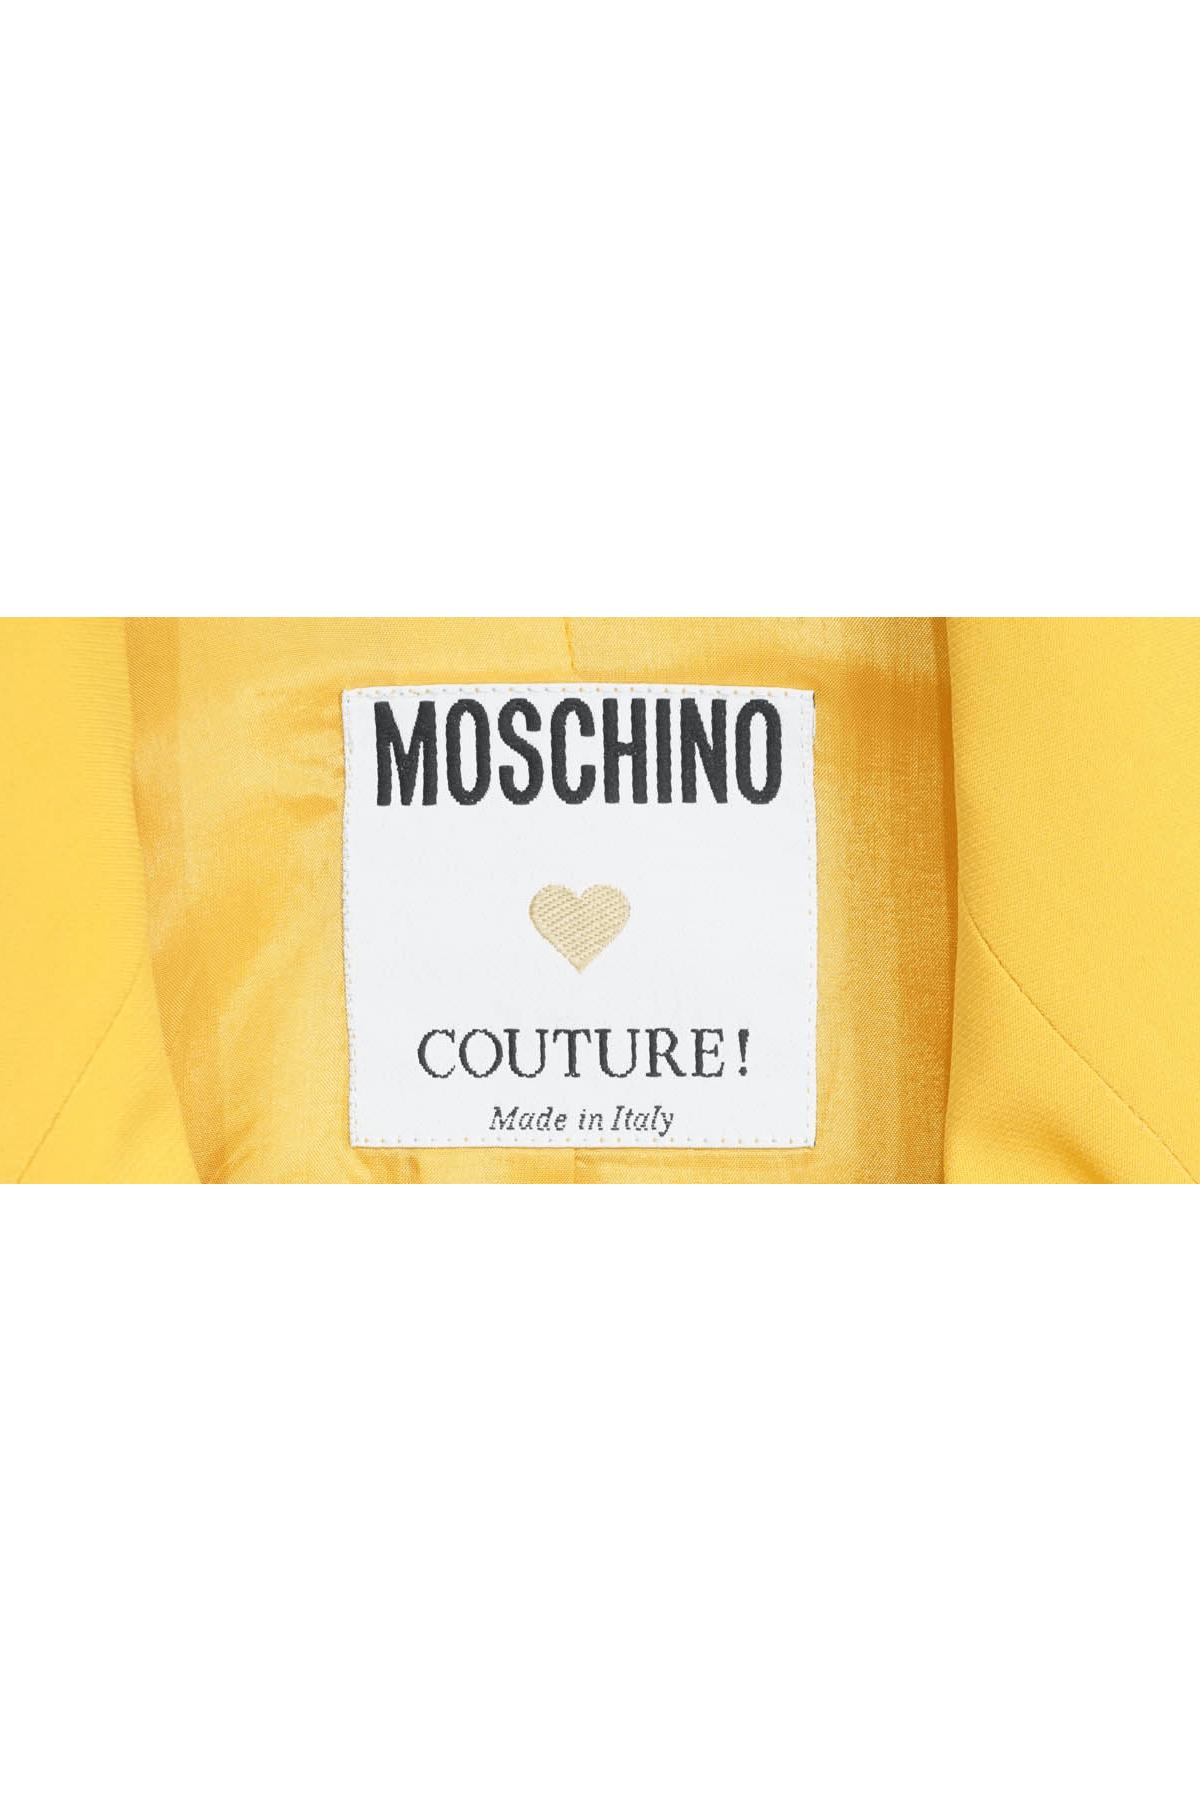 Moschino Couture "Let's Keep Fashion Tidy" Size 8